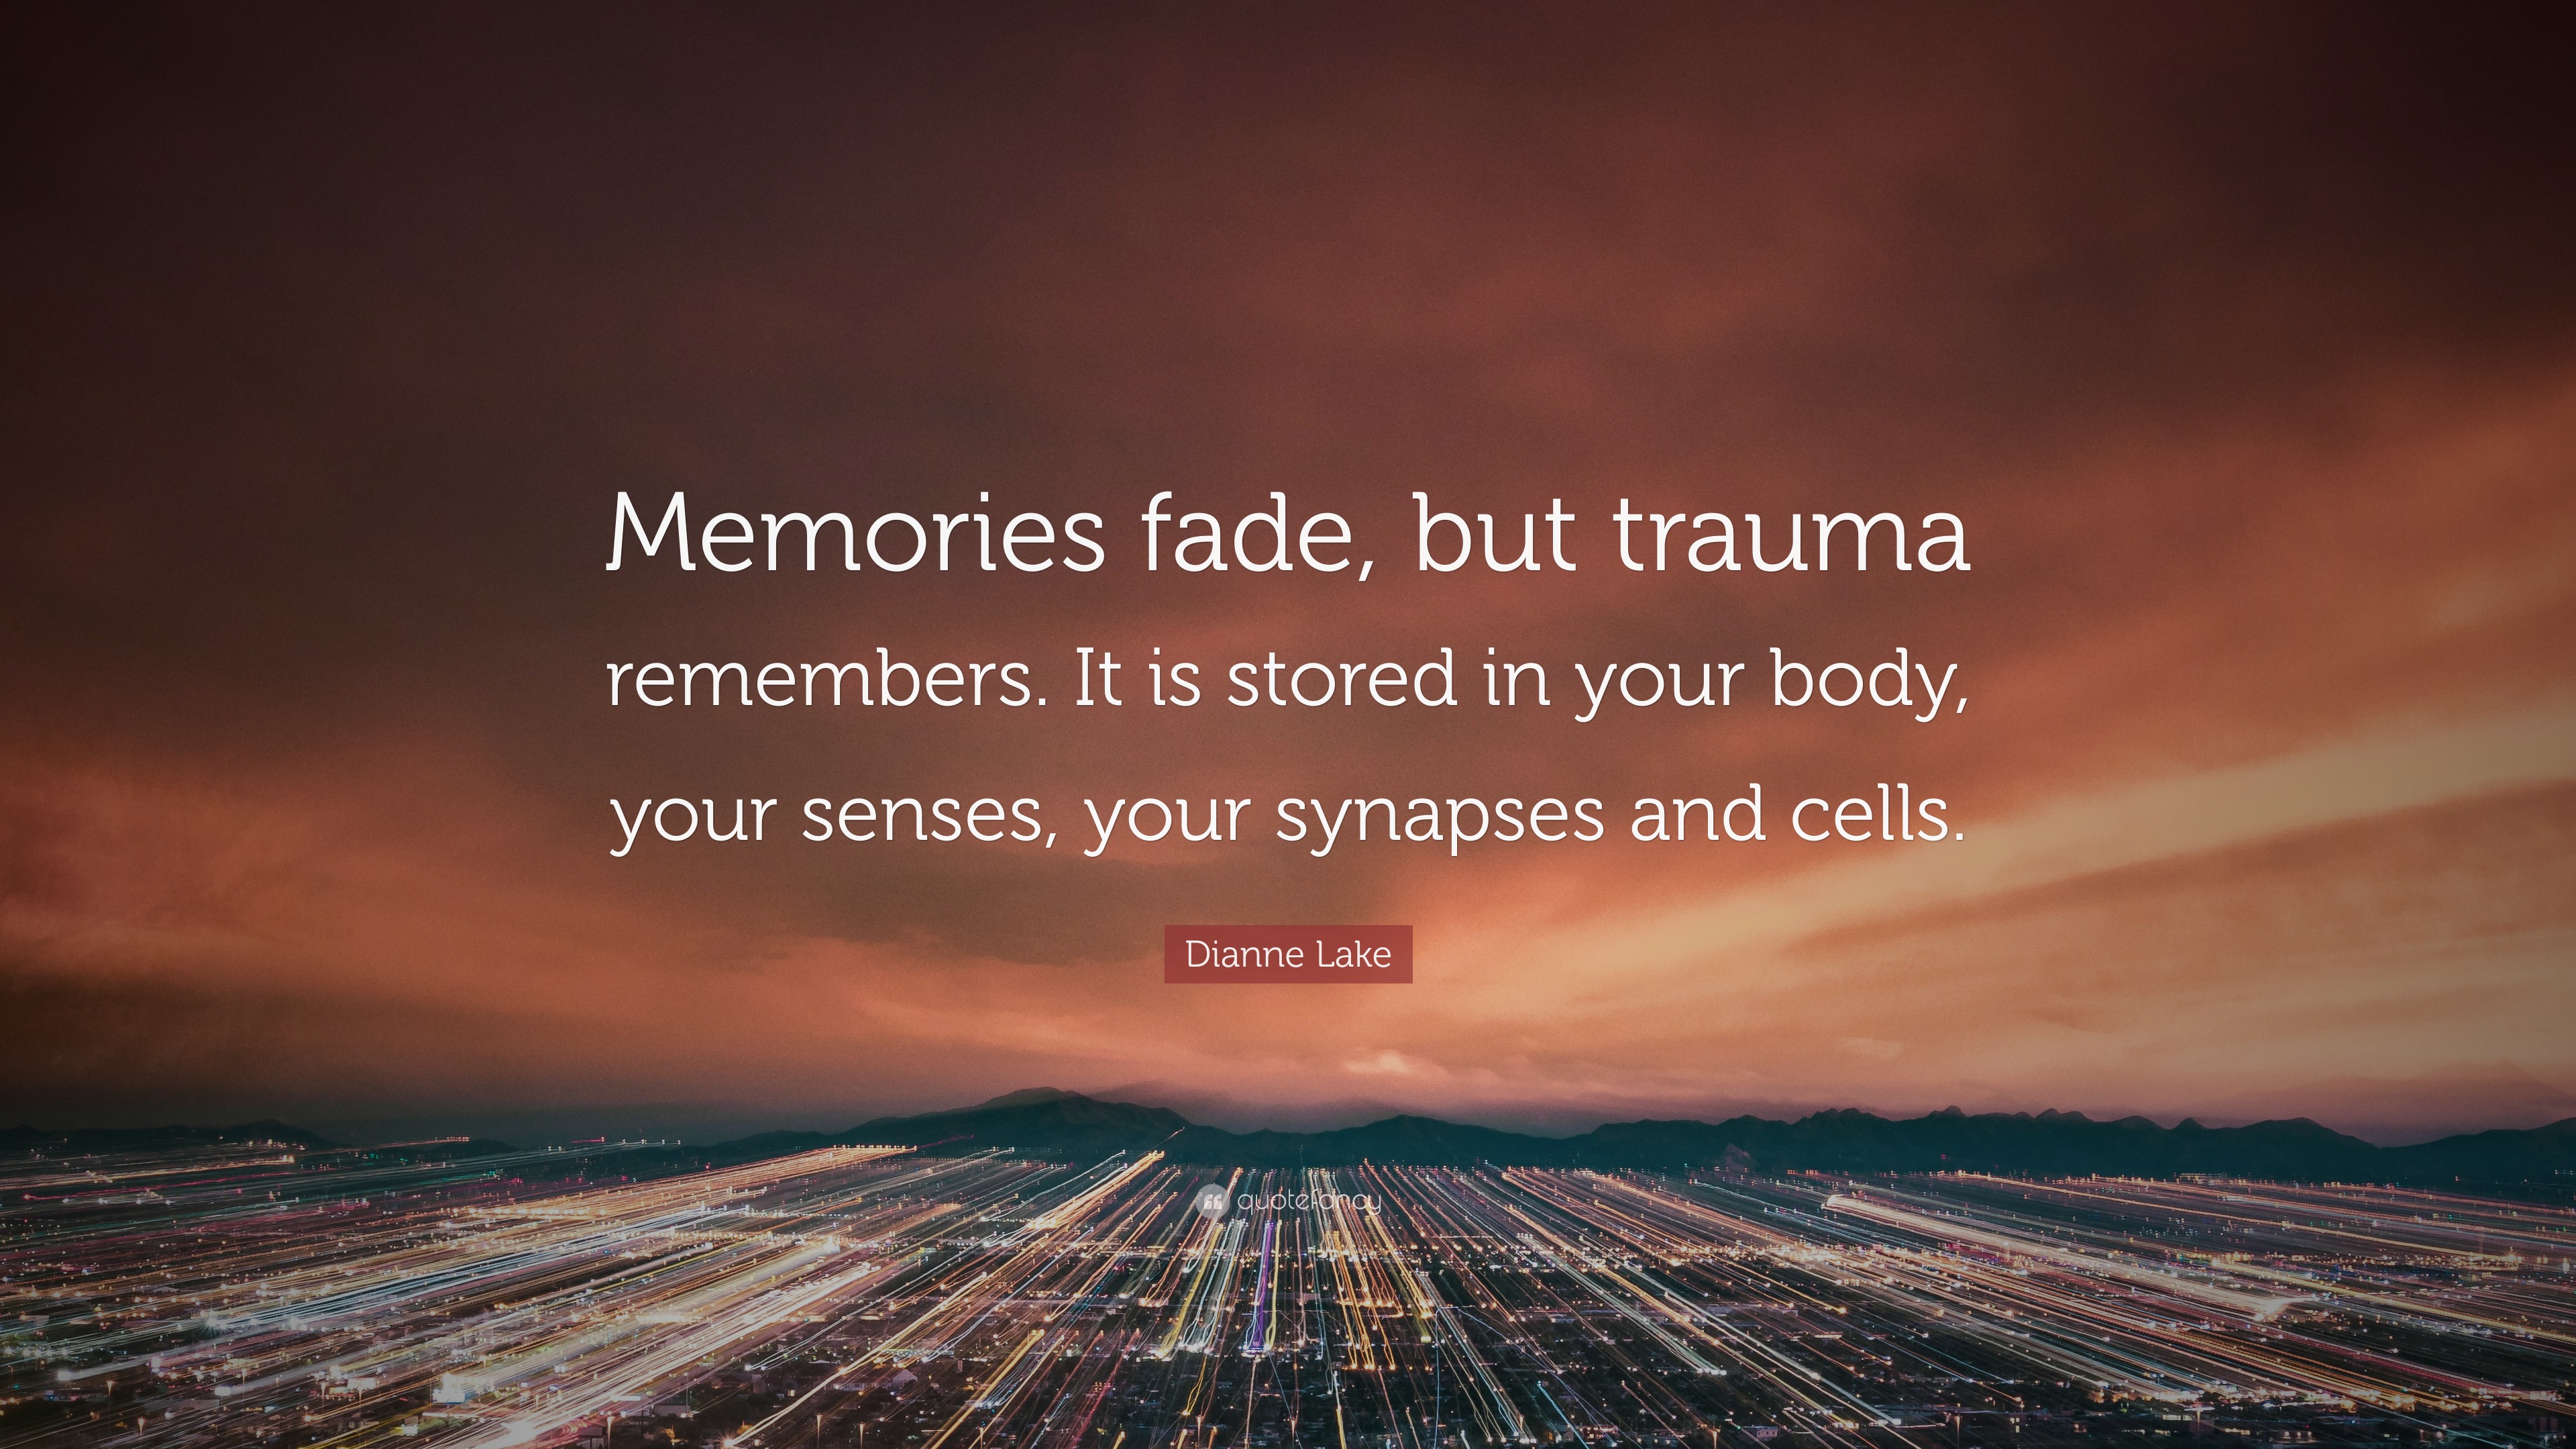 Dianne Lake Quote “Memories fade, but trauma remembers. It is stored